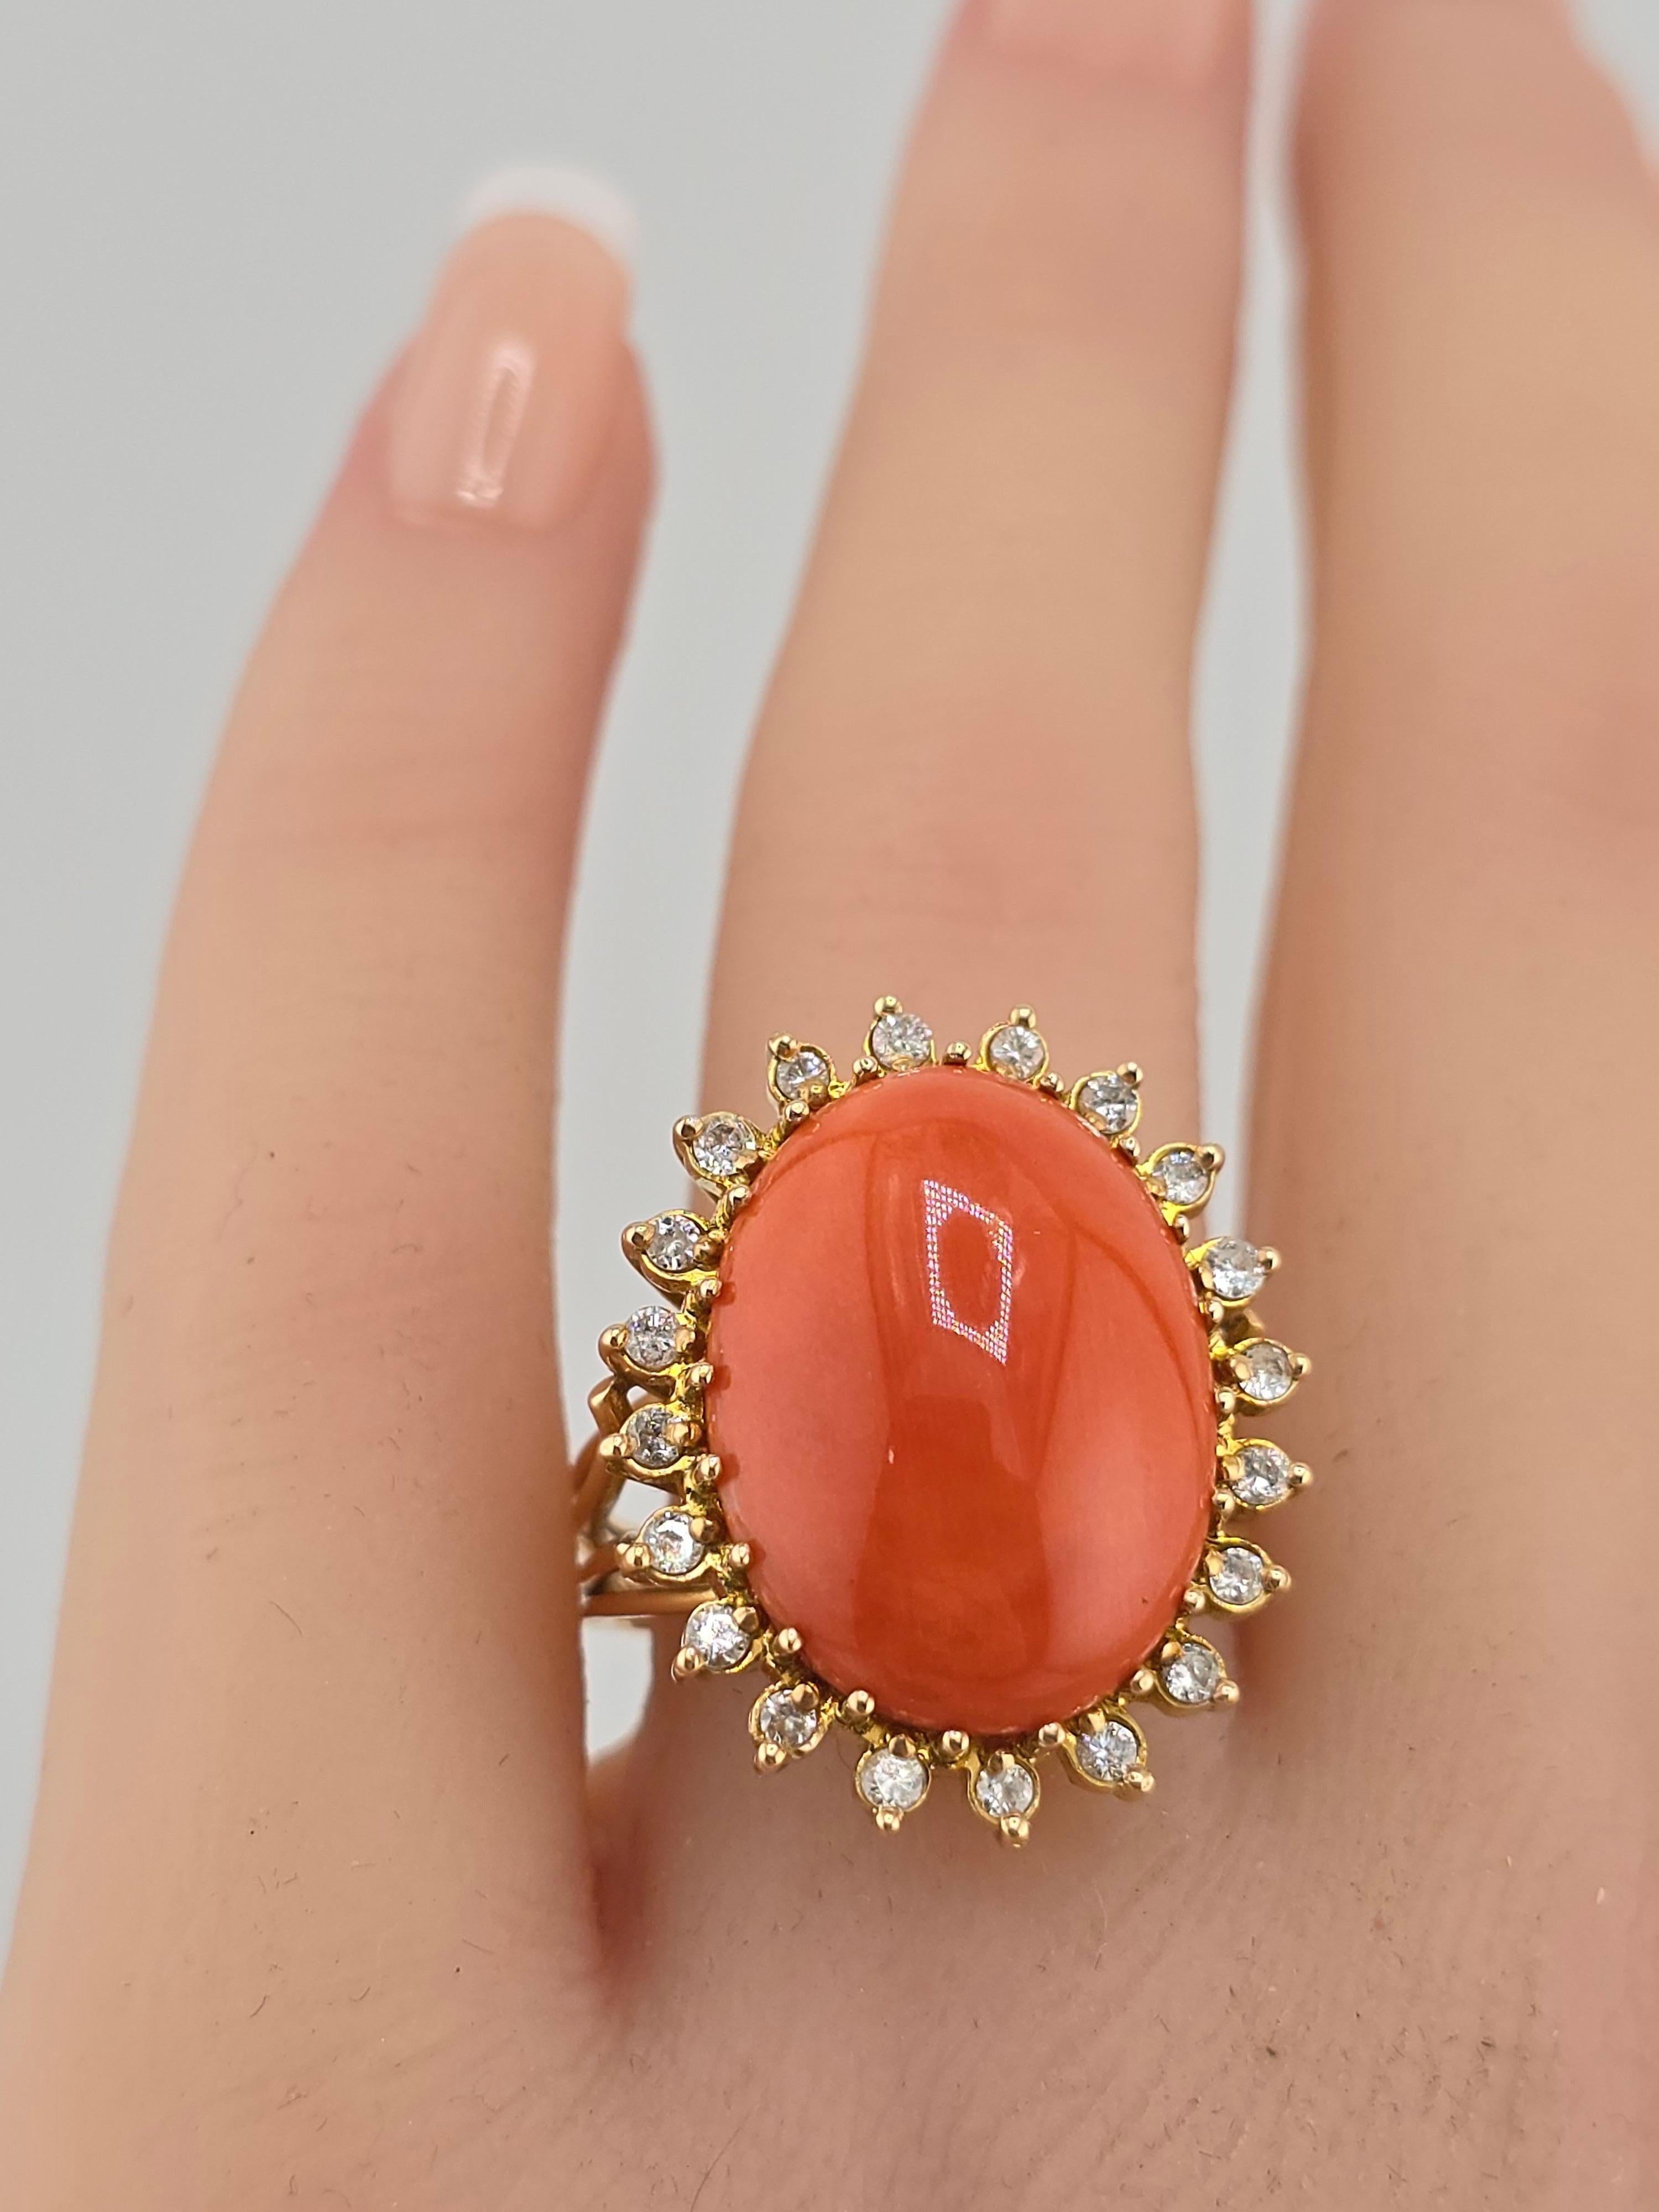 Marvelous Italian Momo Coral 14K Yellow Gold Ring Surrounded With Diamonds  For Sale 3